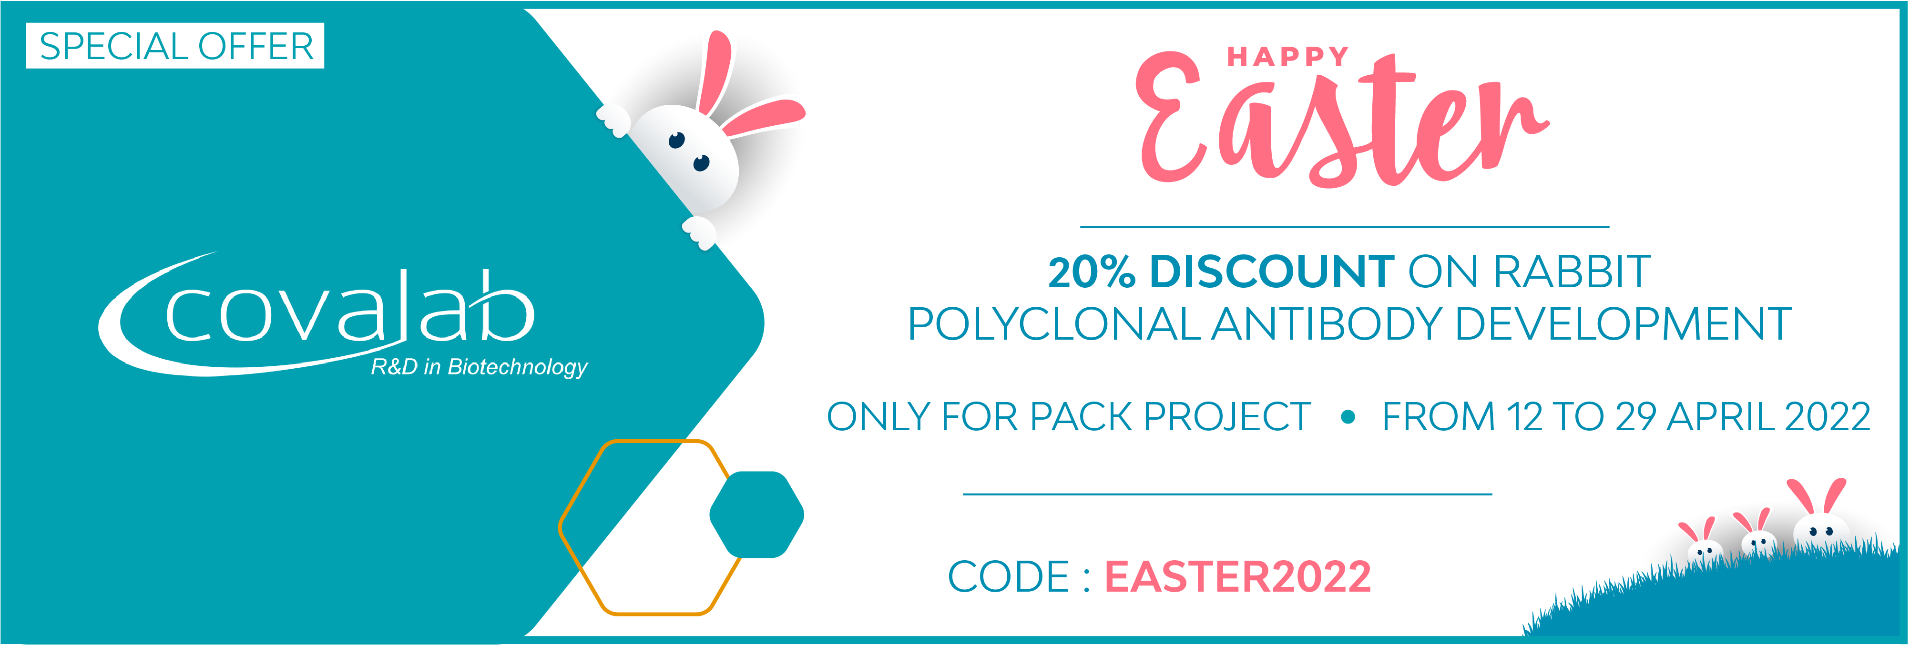 Easter promo 2022